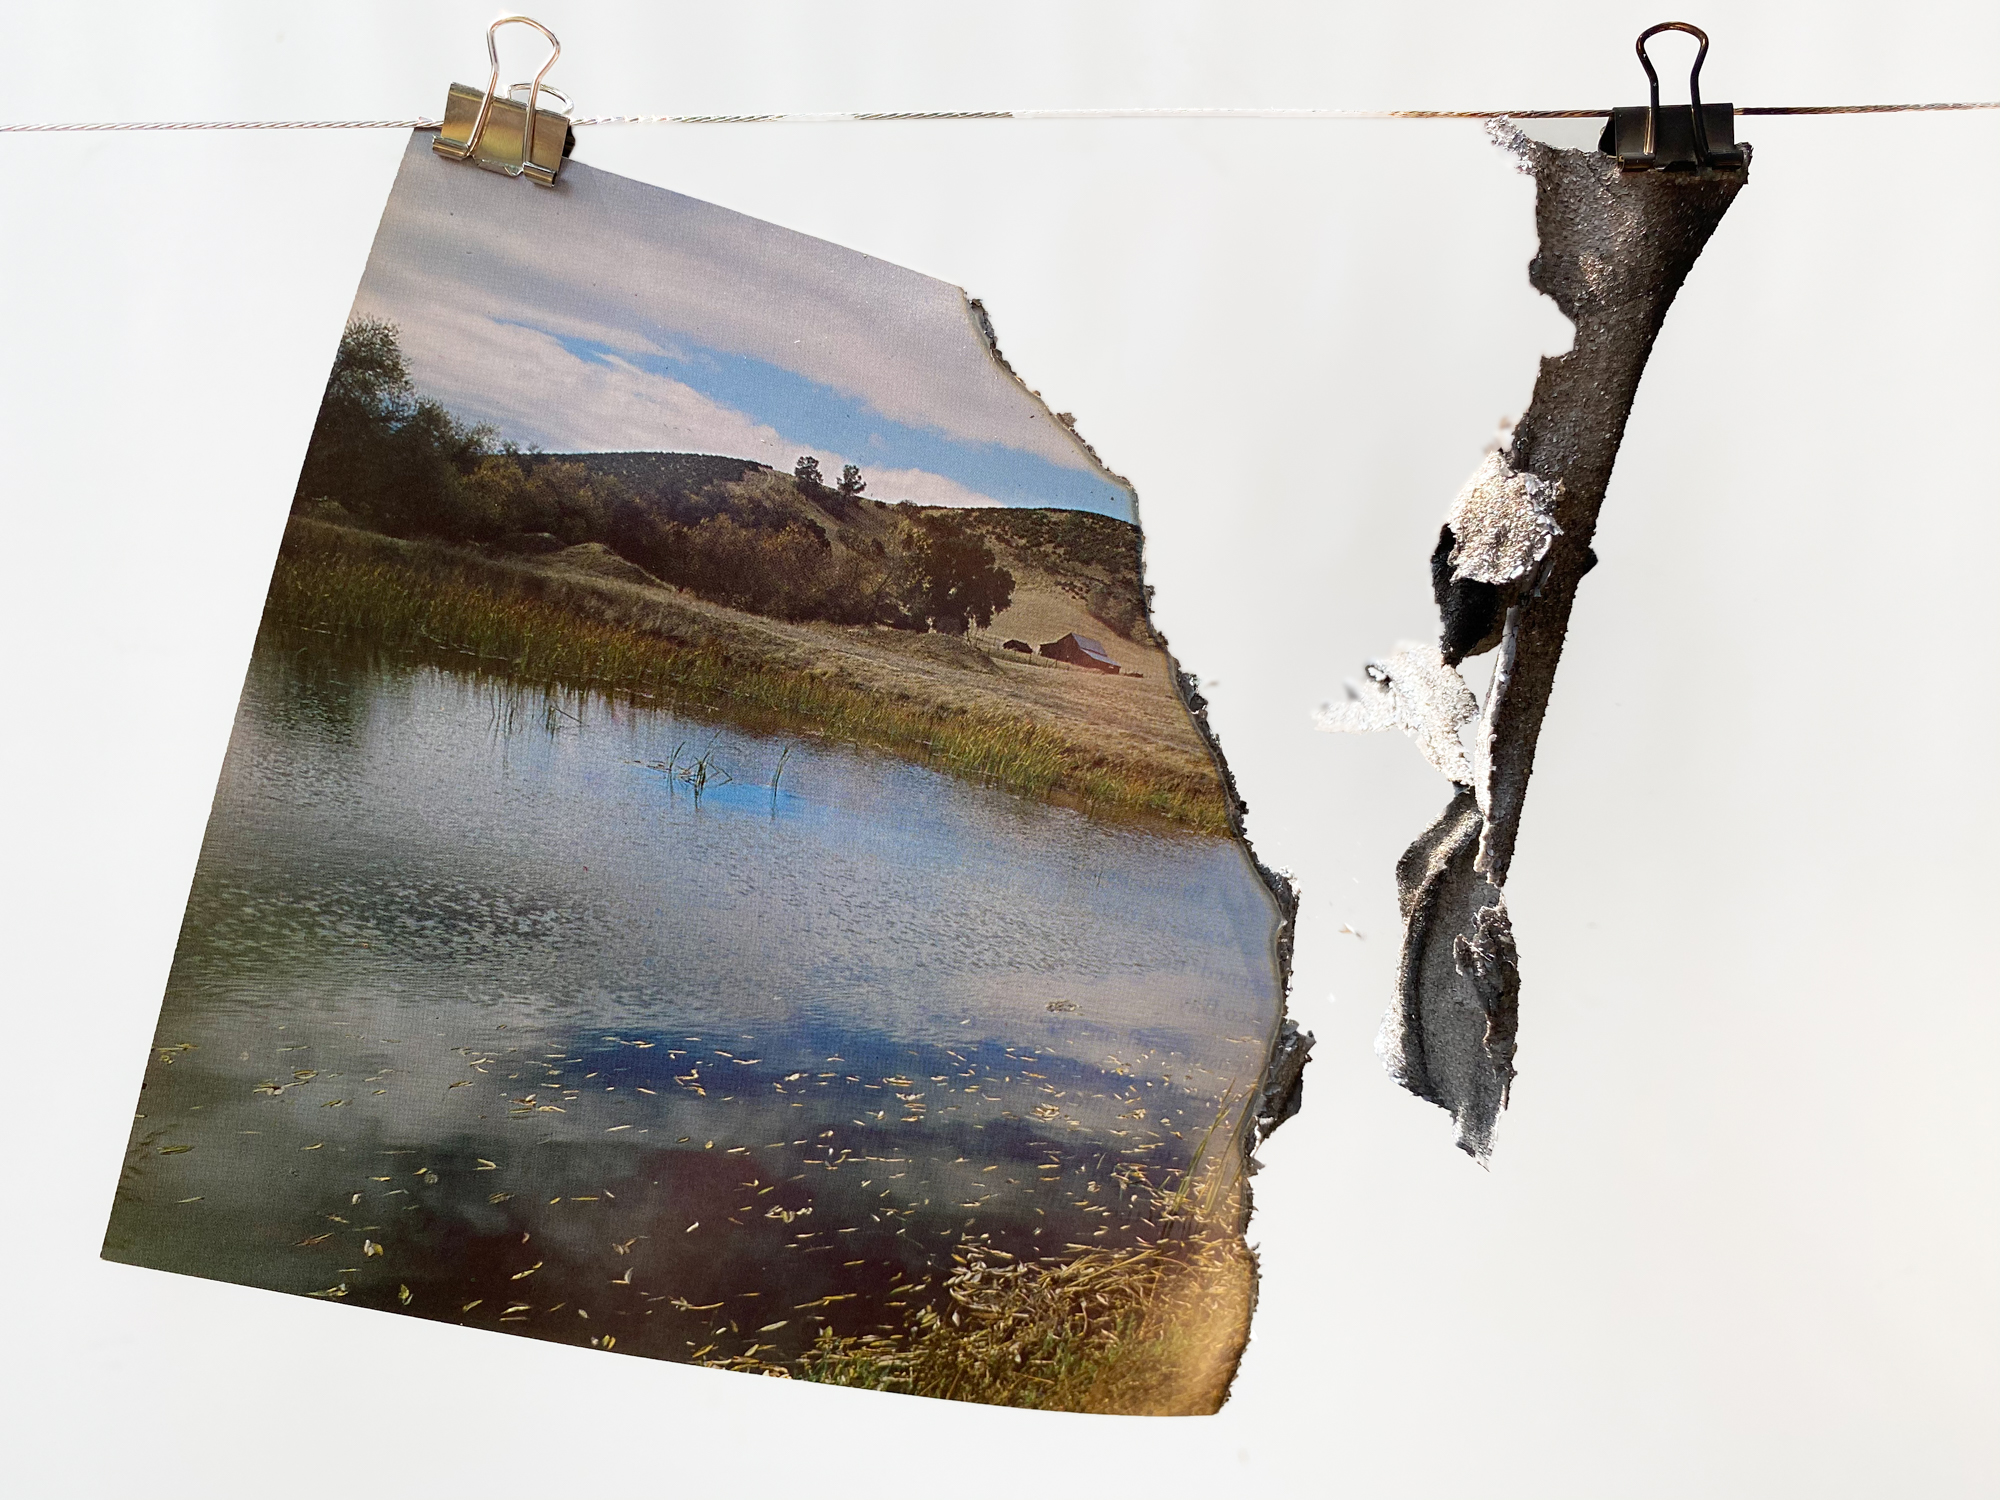 burnt, extinguished and re-photographed image of Meadow_Lake in the Gabilan_Range